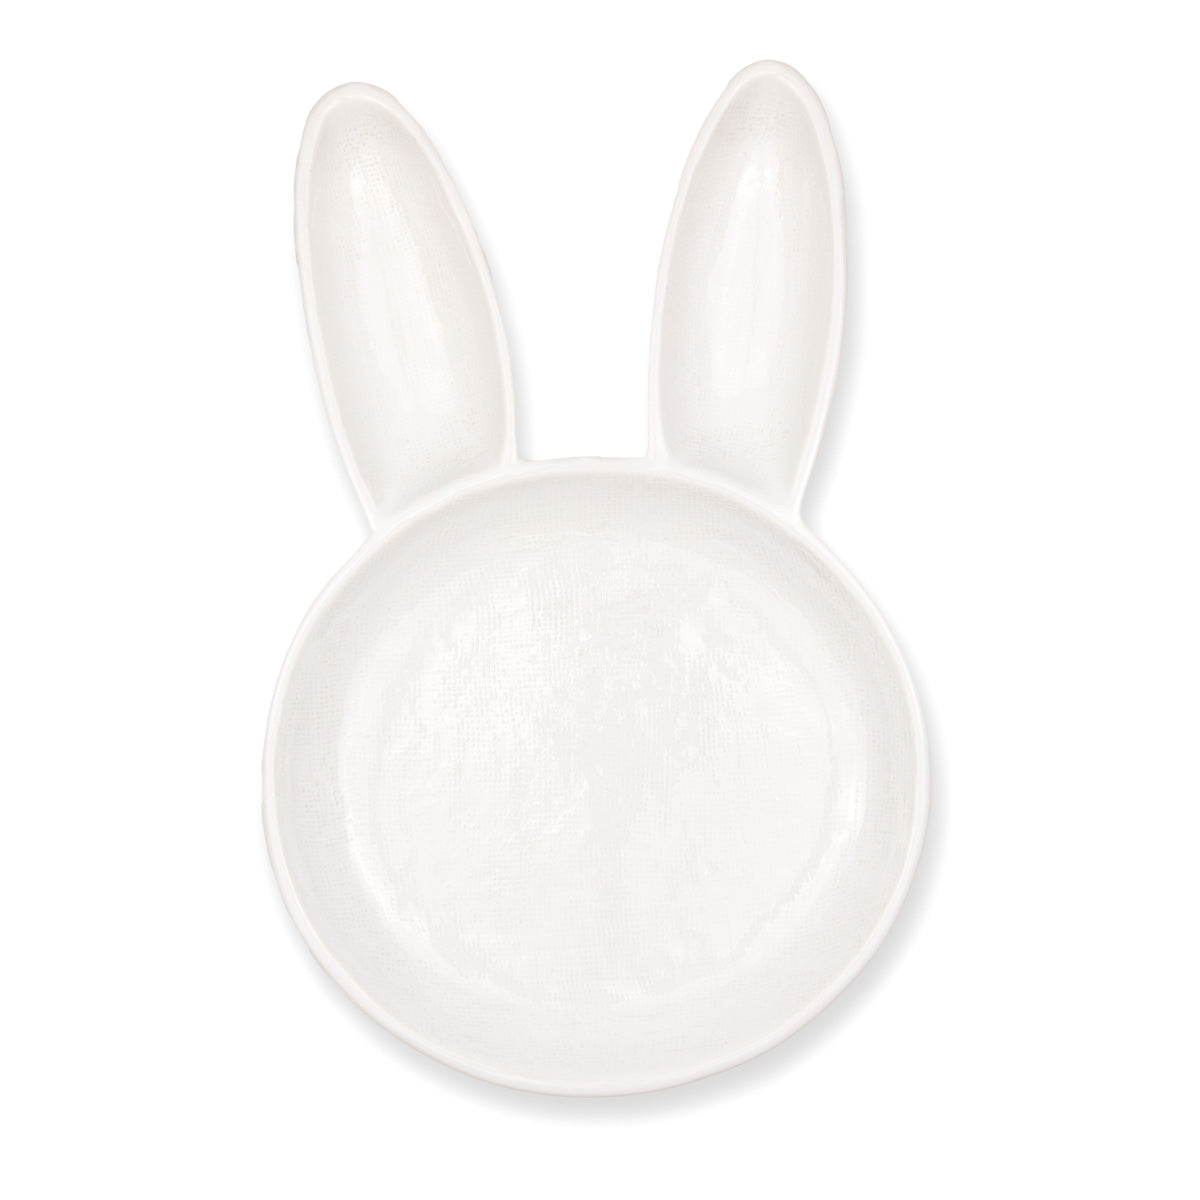 Divided Bunny Dish - White